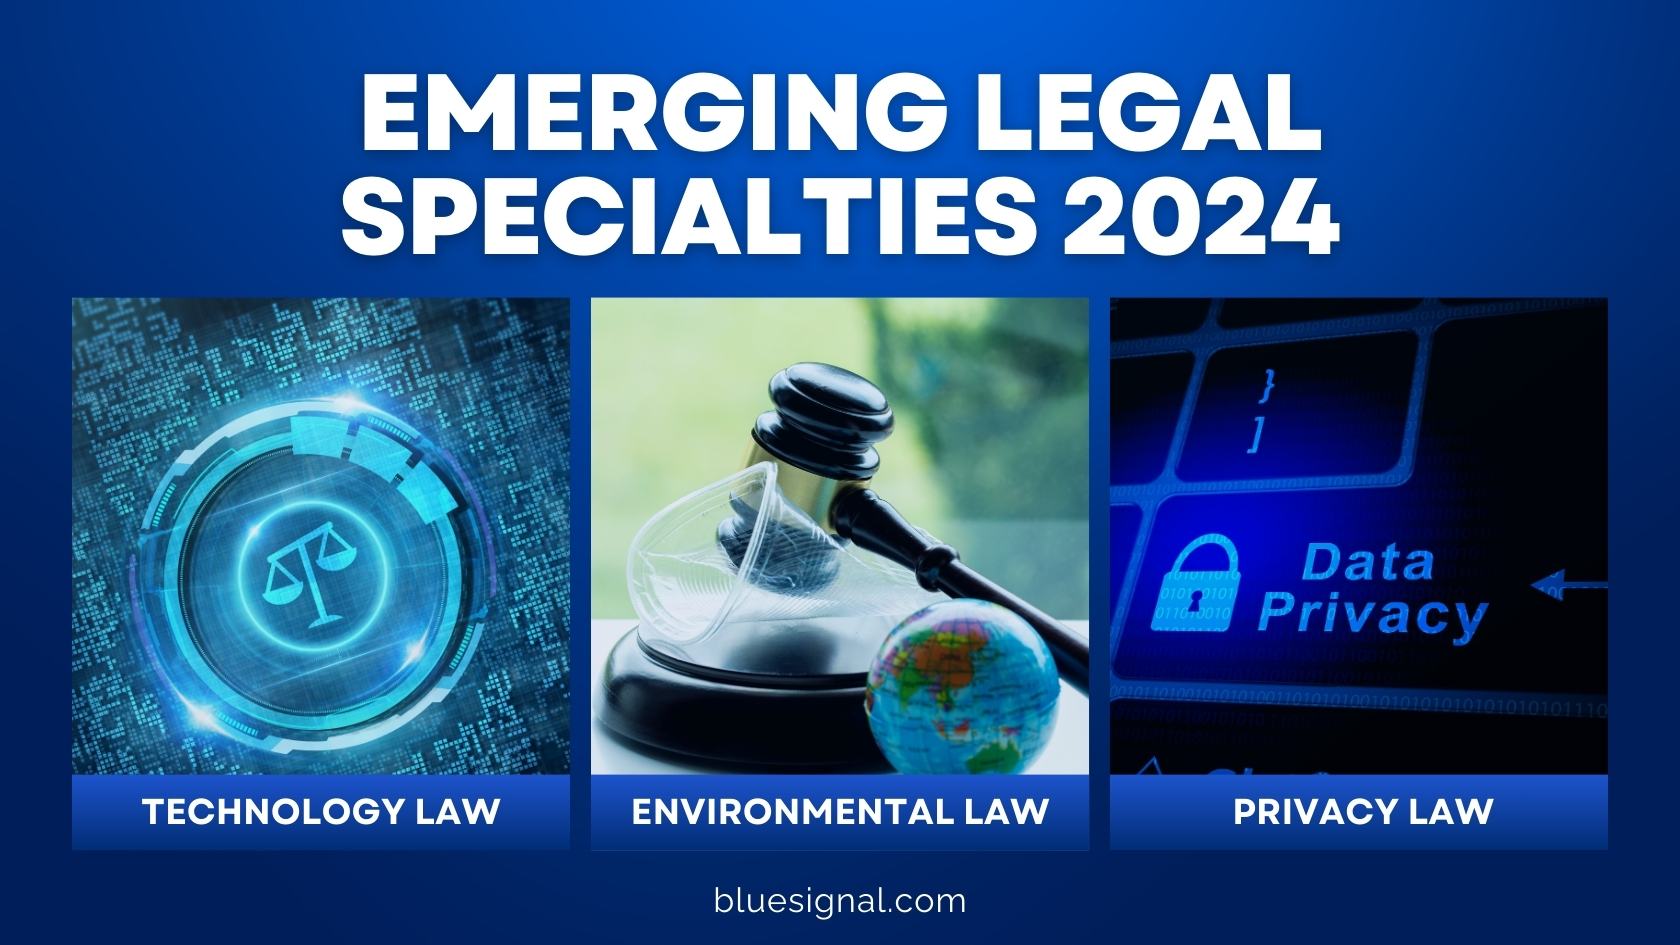 "Digital collage featuring symbols of three emerging legal specialties: Technology Law with a digital scales of justice, Environmental Law with a gavel and globe, and Privacy Law with data security imagery.